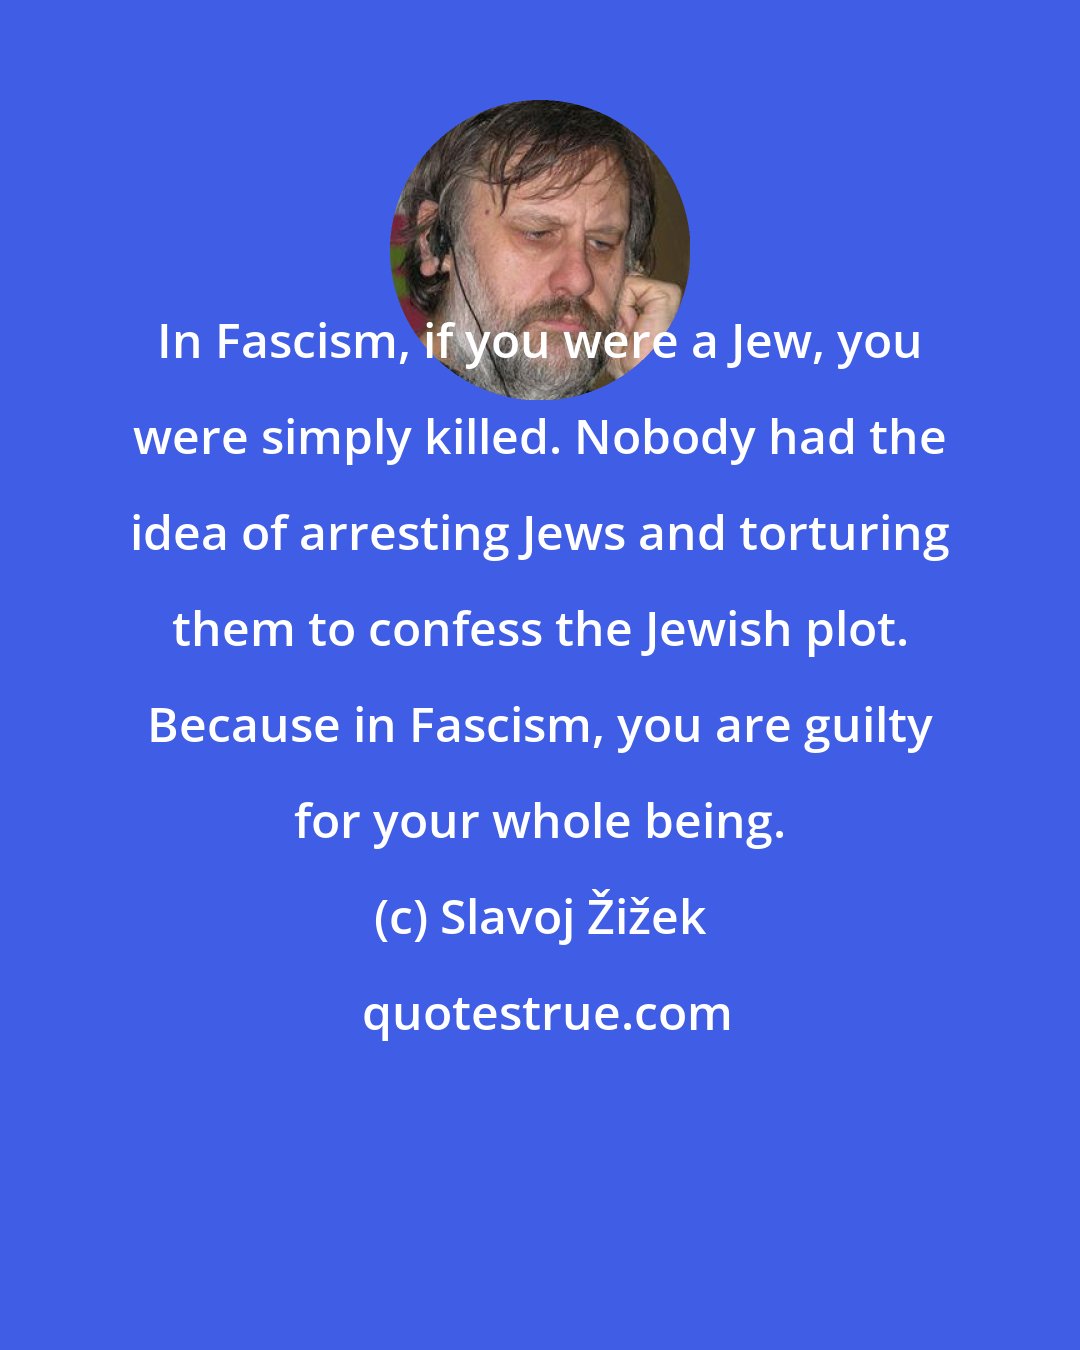 Slavoj Žižek: In Fascism, if you were a Jew, you were simply killed. Nobody had the idea of arresting Jews and torturing them to confess the Jewish plot. Because in Fascism, you are guilty for your whole being.